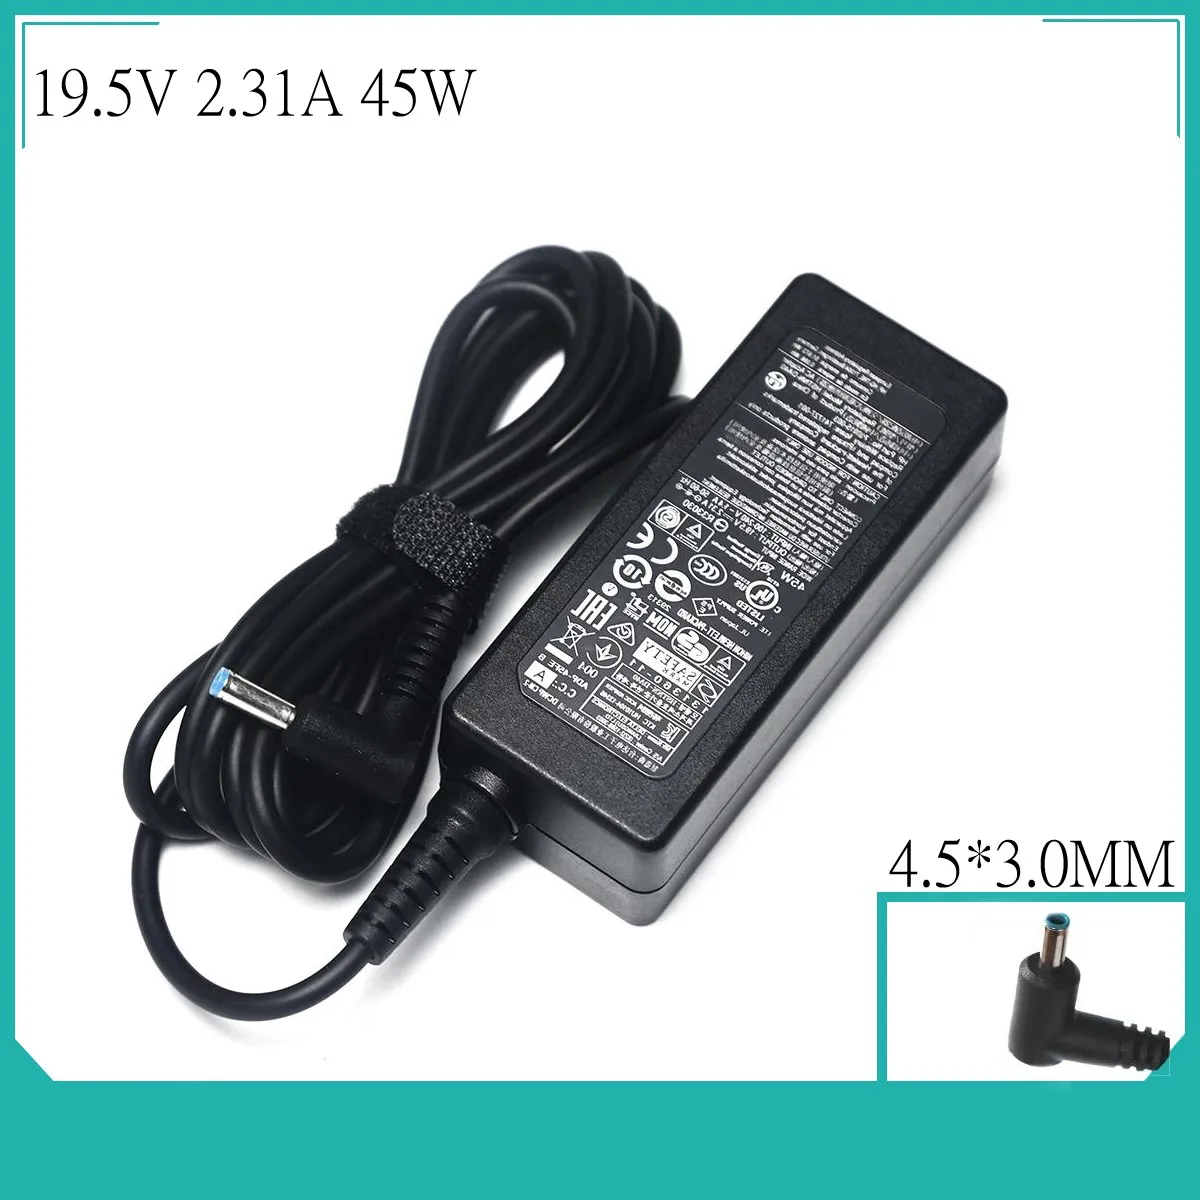 

19.5V 2.31A 4.5*3.0mm 45W Laptop AC Power Adapter Charger For HP Stream X360 11 13 14 Searies 741727-001 740015-001 740015-002